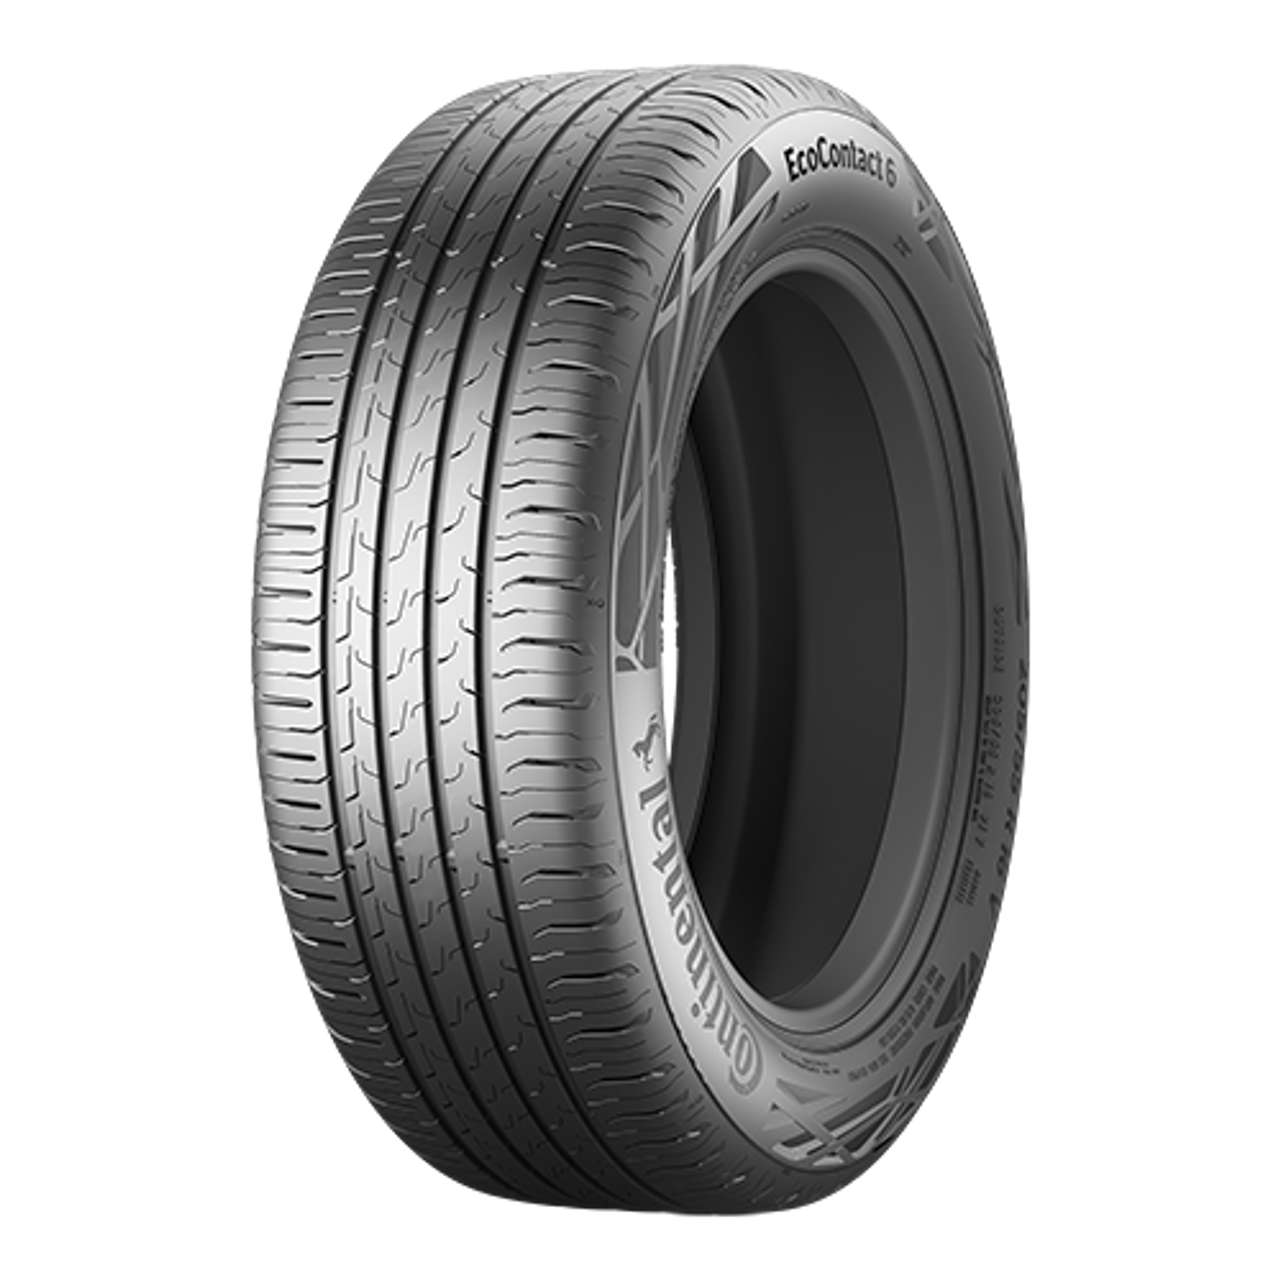 CONTINENTAL ECOCONTACT 6 (EVc) 205/55R16 94H XL